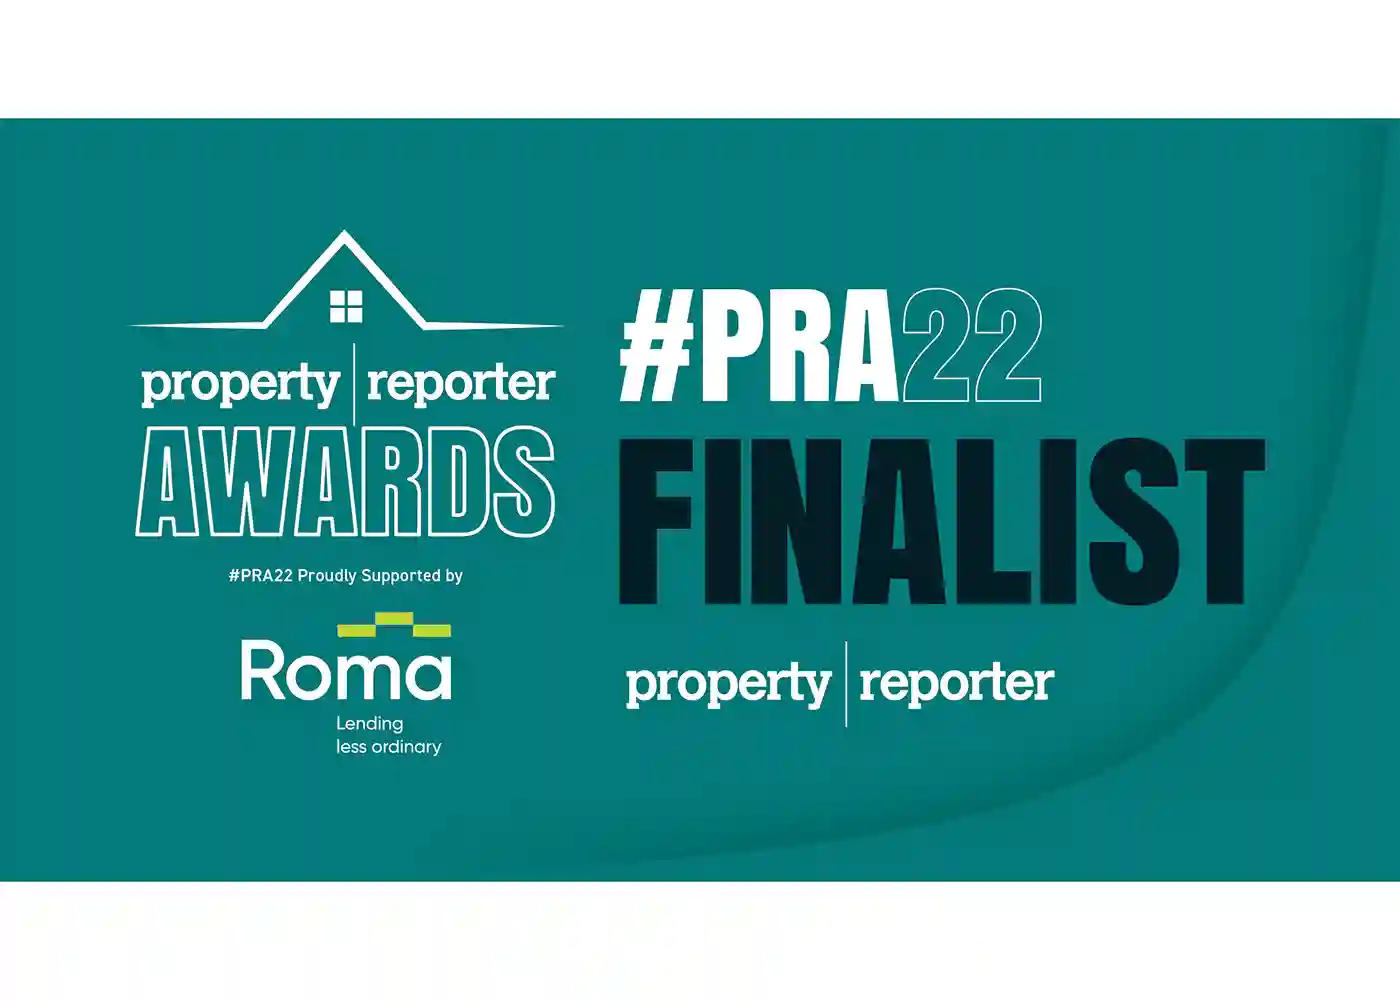 Our Awards - Property Reporter Awards